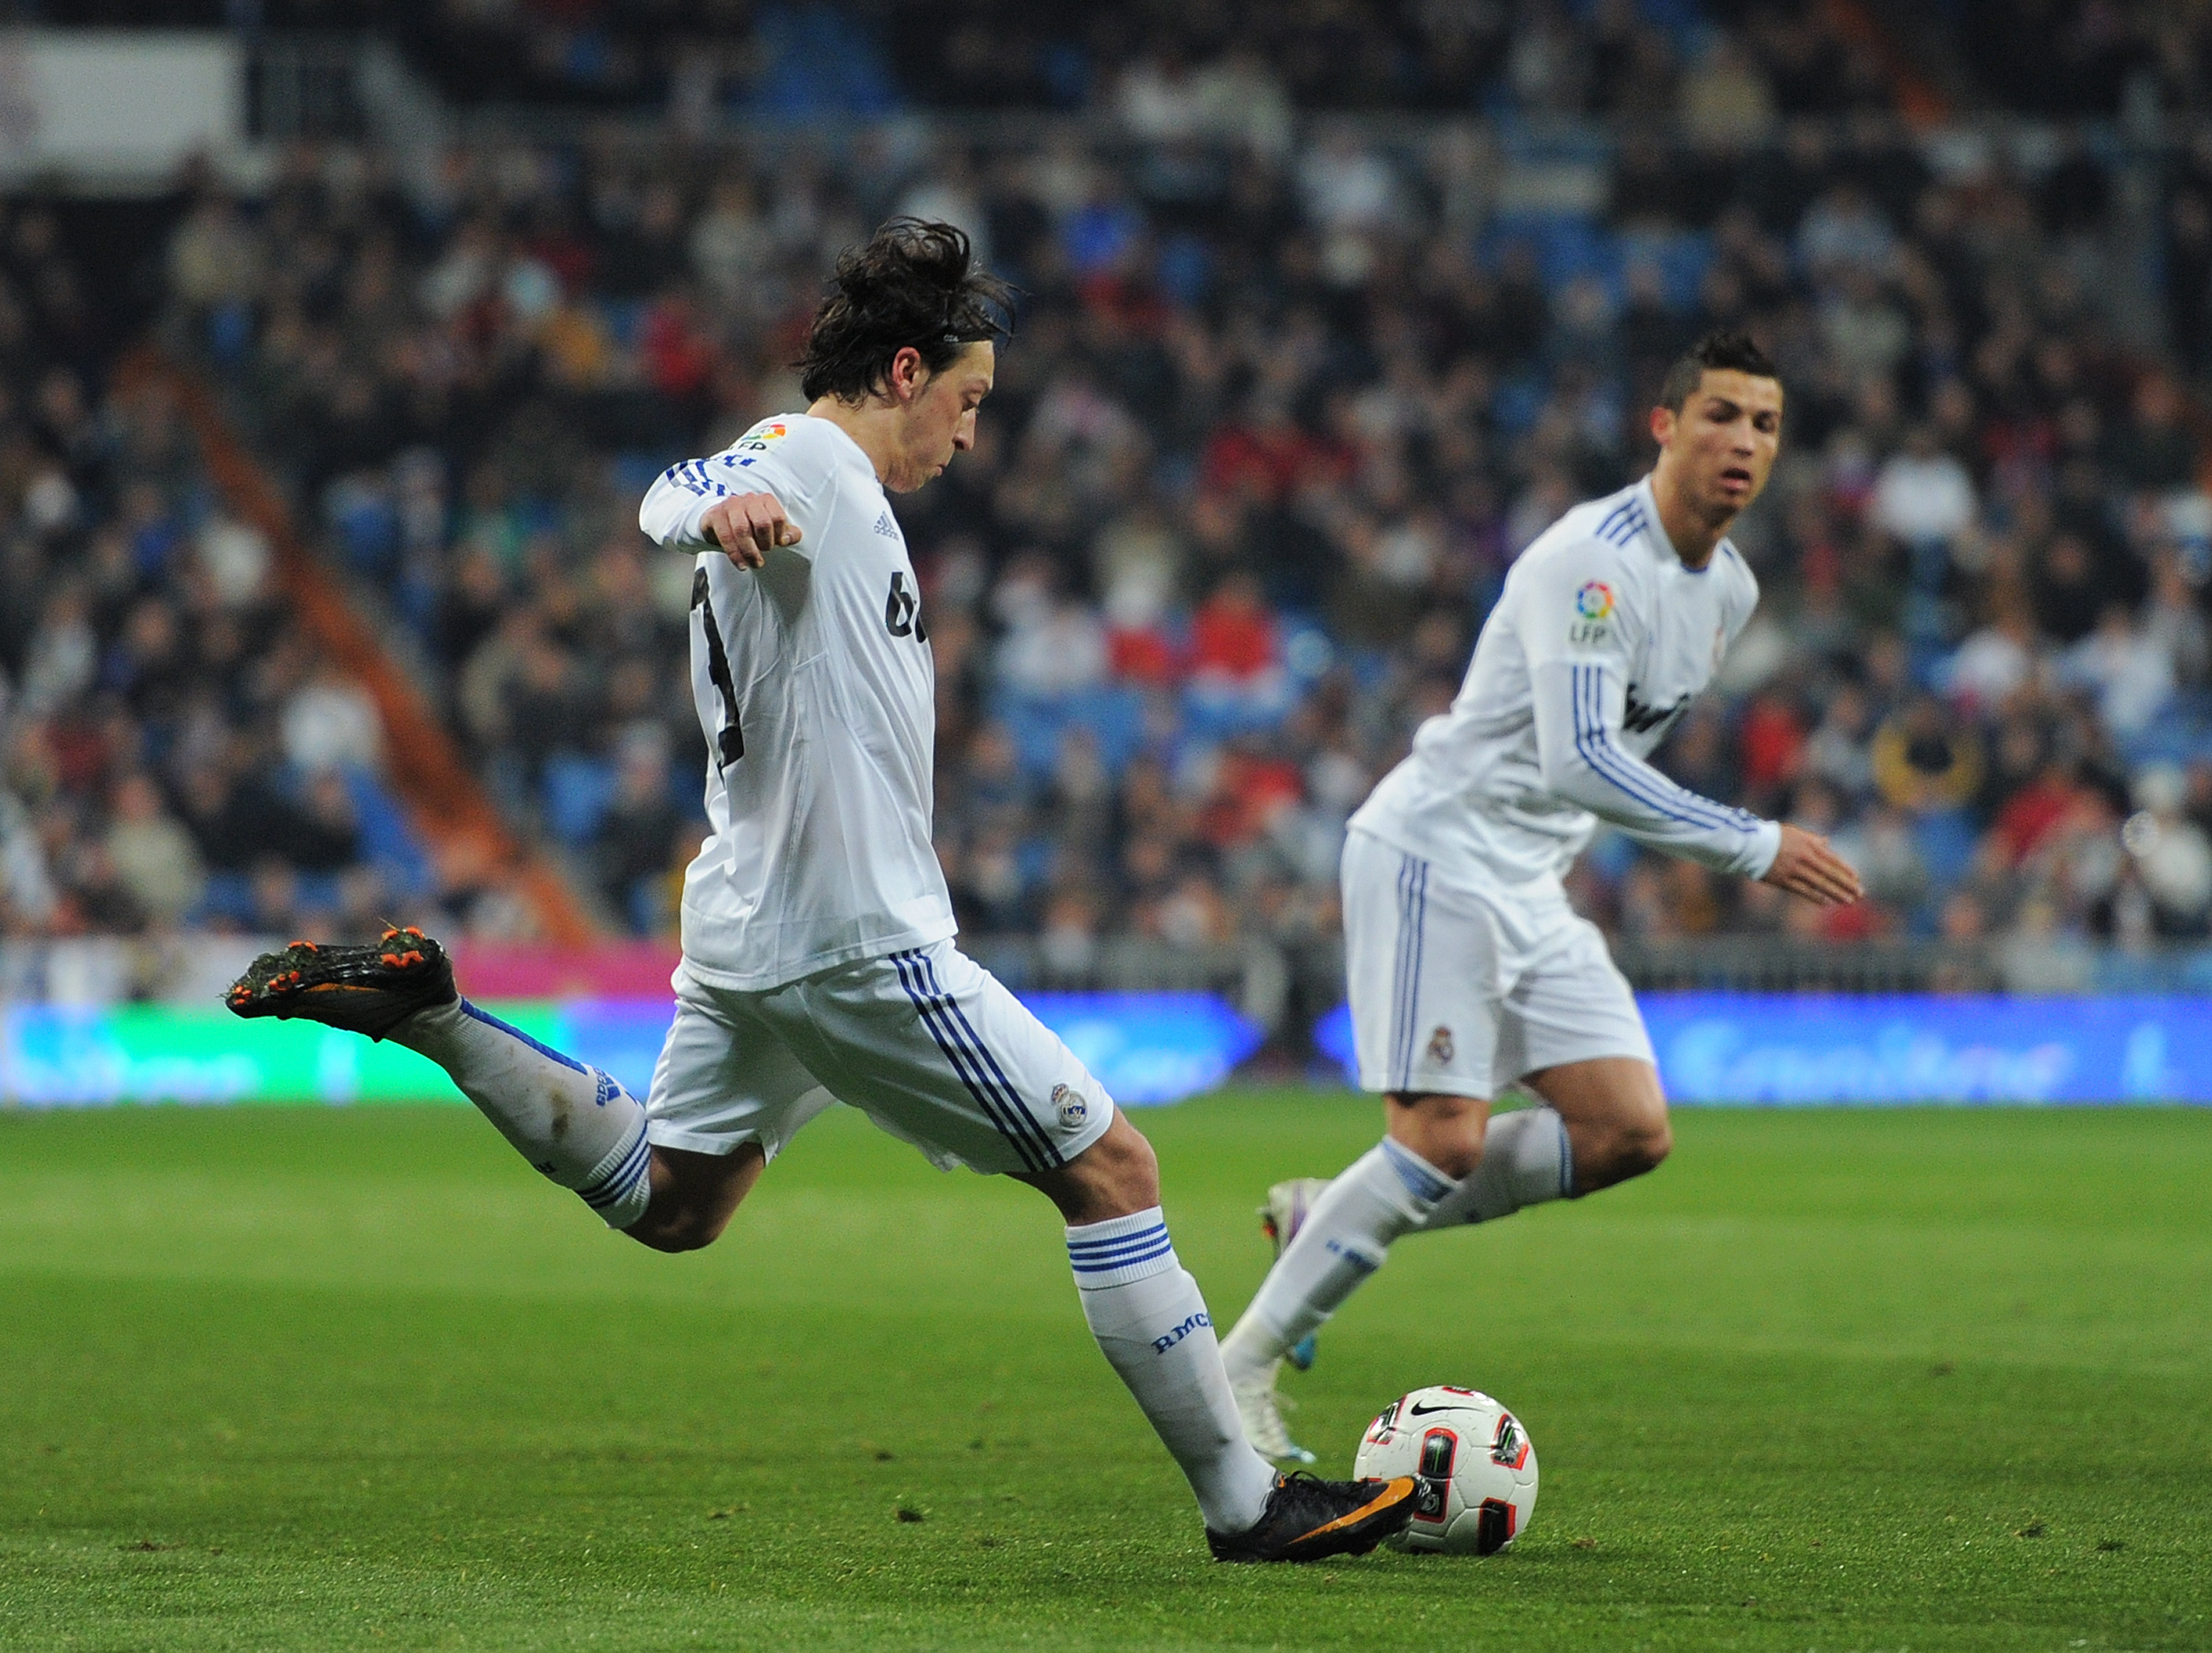 MADRID, SPAIN - MARCH 03:  Mesut Ozil of Real Madrid strikes a free kick to hit the goal post backdropped by his teammate Cristiano Ronaldo during the la Liga match between Real Madrid and Malaga at Estadio Santiago Bernabeu on March 3, 2011 in Madrid, Sp